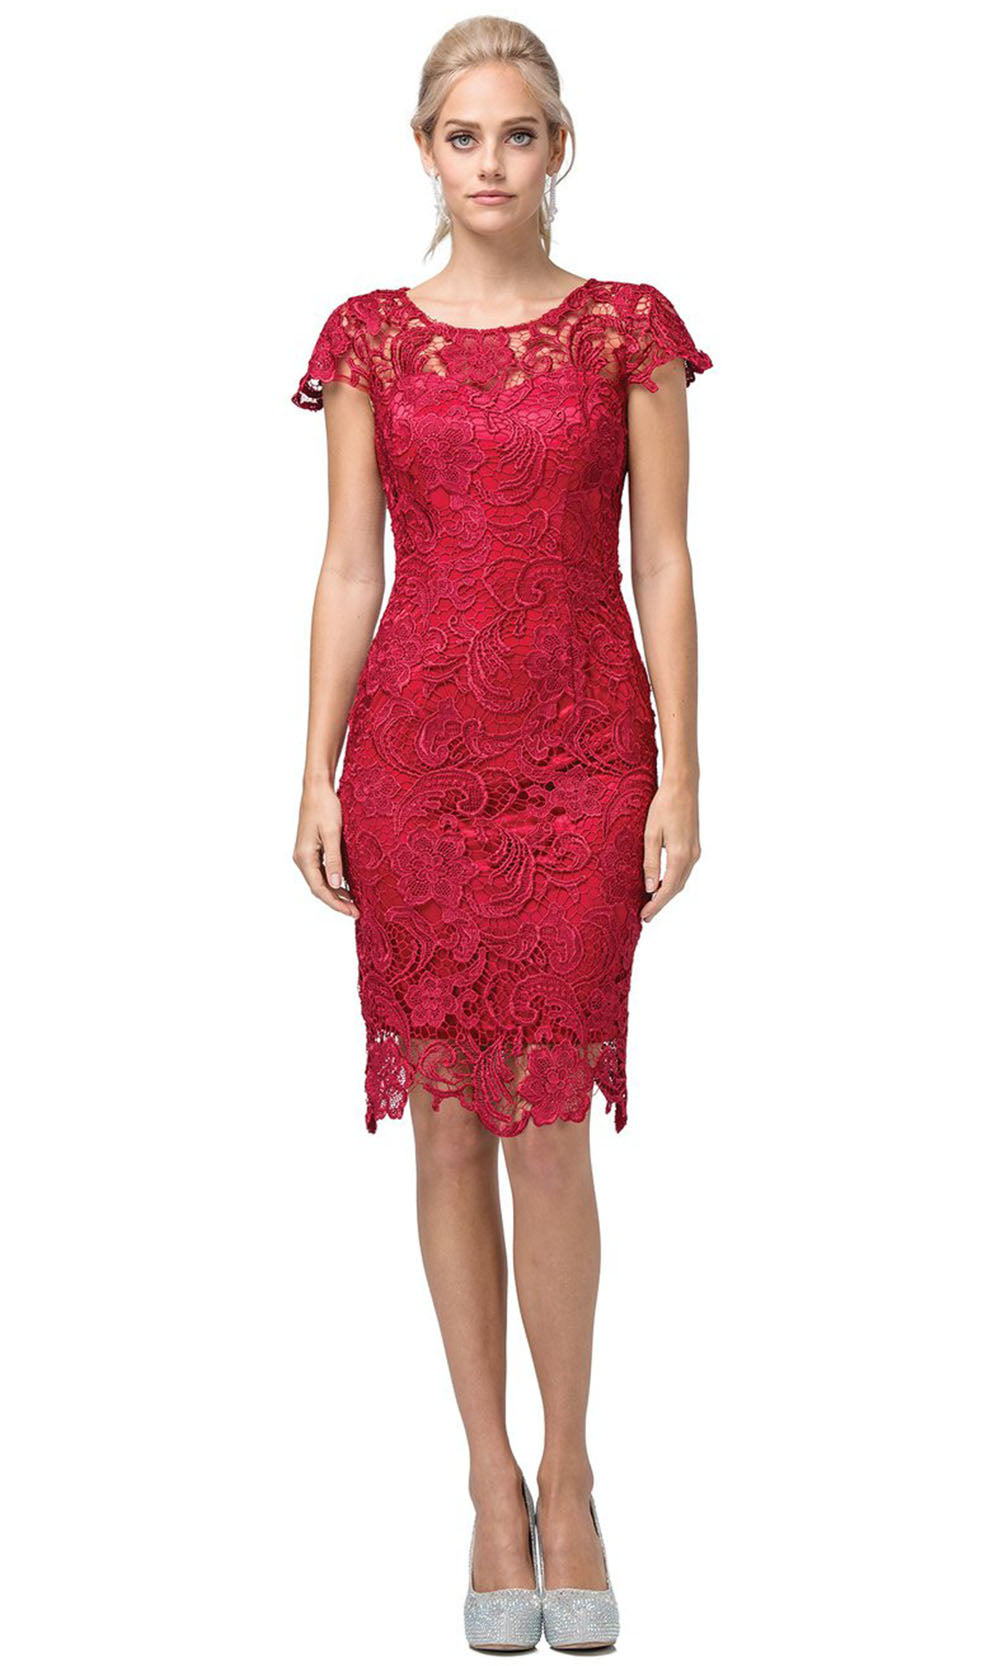 Dancing Queen - 9677 Jewel Embroidered Lacey Dress In Red